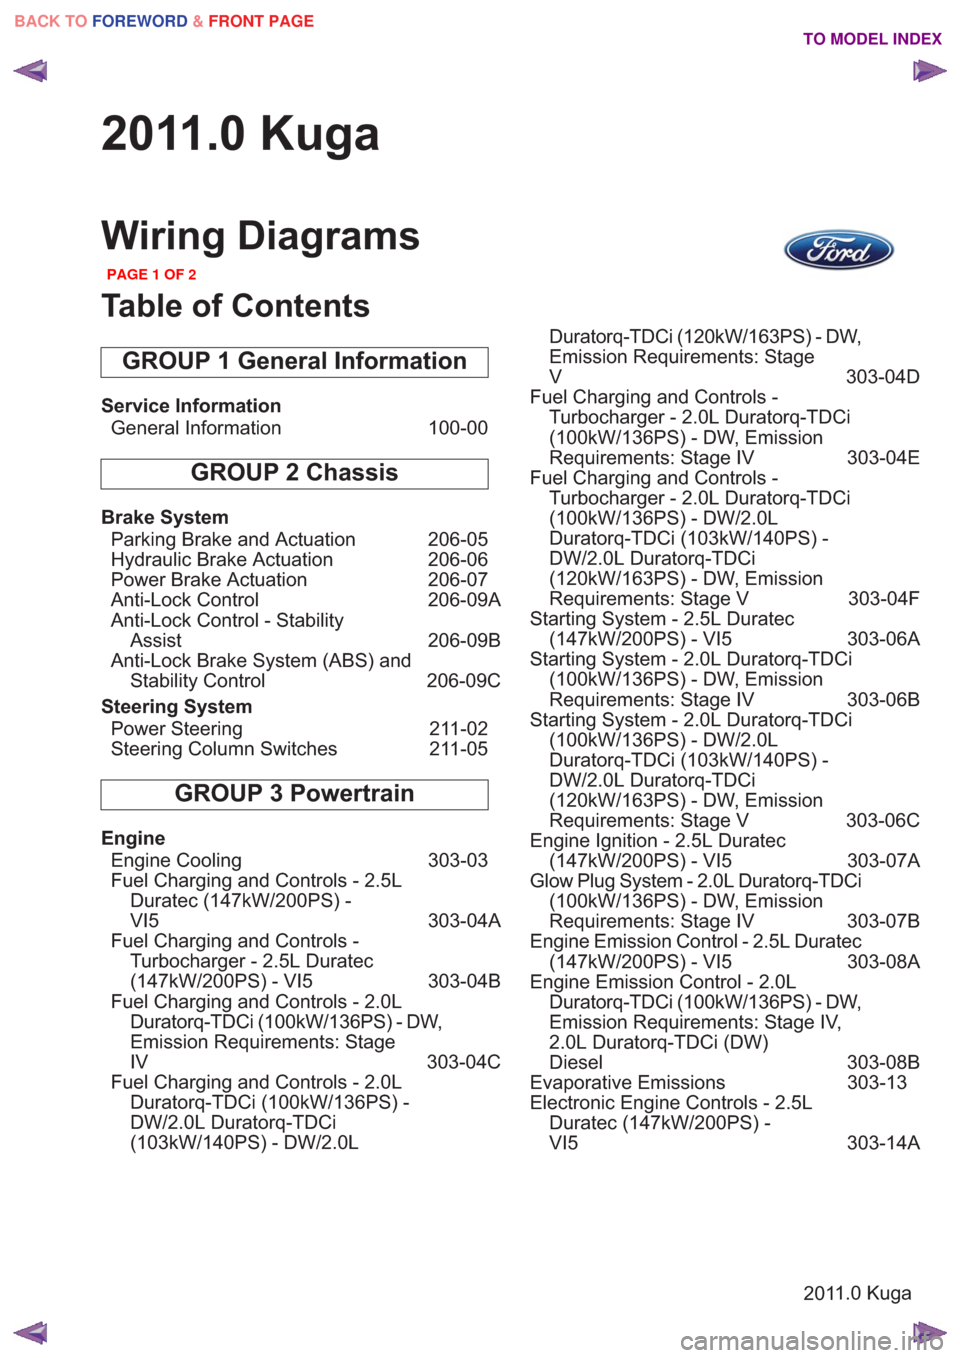 FORD KUGA 2011 1.G Wiring Diagram Workshop Manual 2011.0 Kuga
Wiring Diagrams
Table of Contents
GROUP 1 General Information
Service InformationGeneral Information 100-00
GROUP 2 Chassis
Brake System
Parking Brake and Actuation 206-05
Hydraulic Brake 